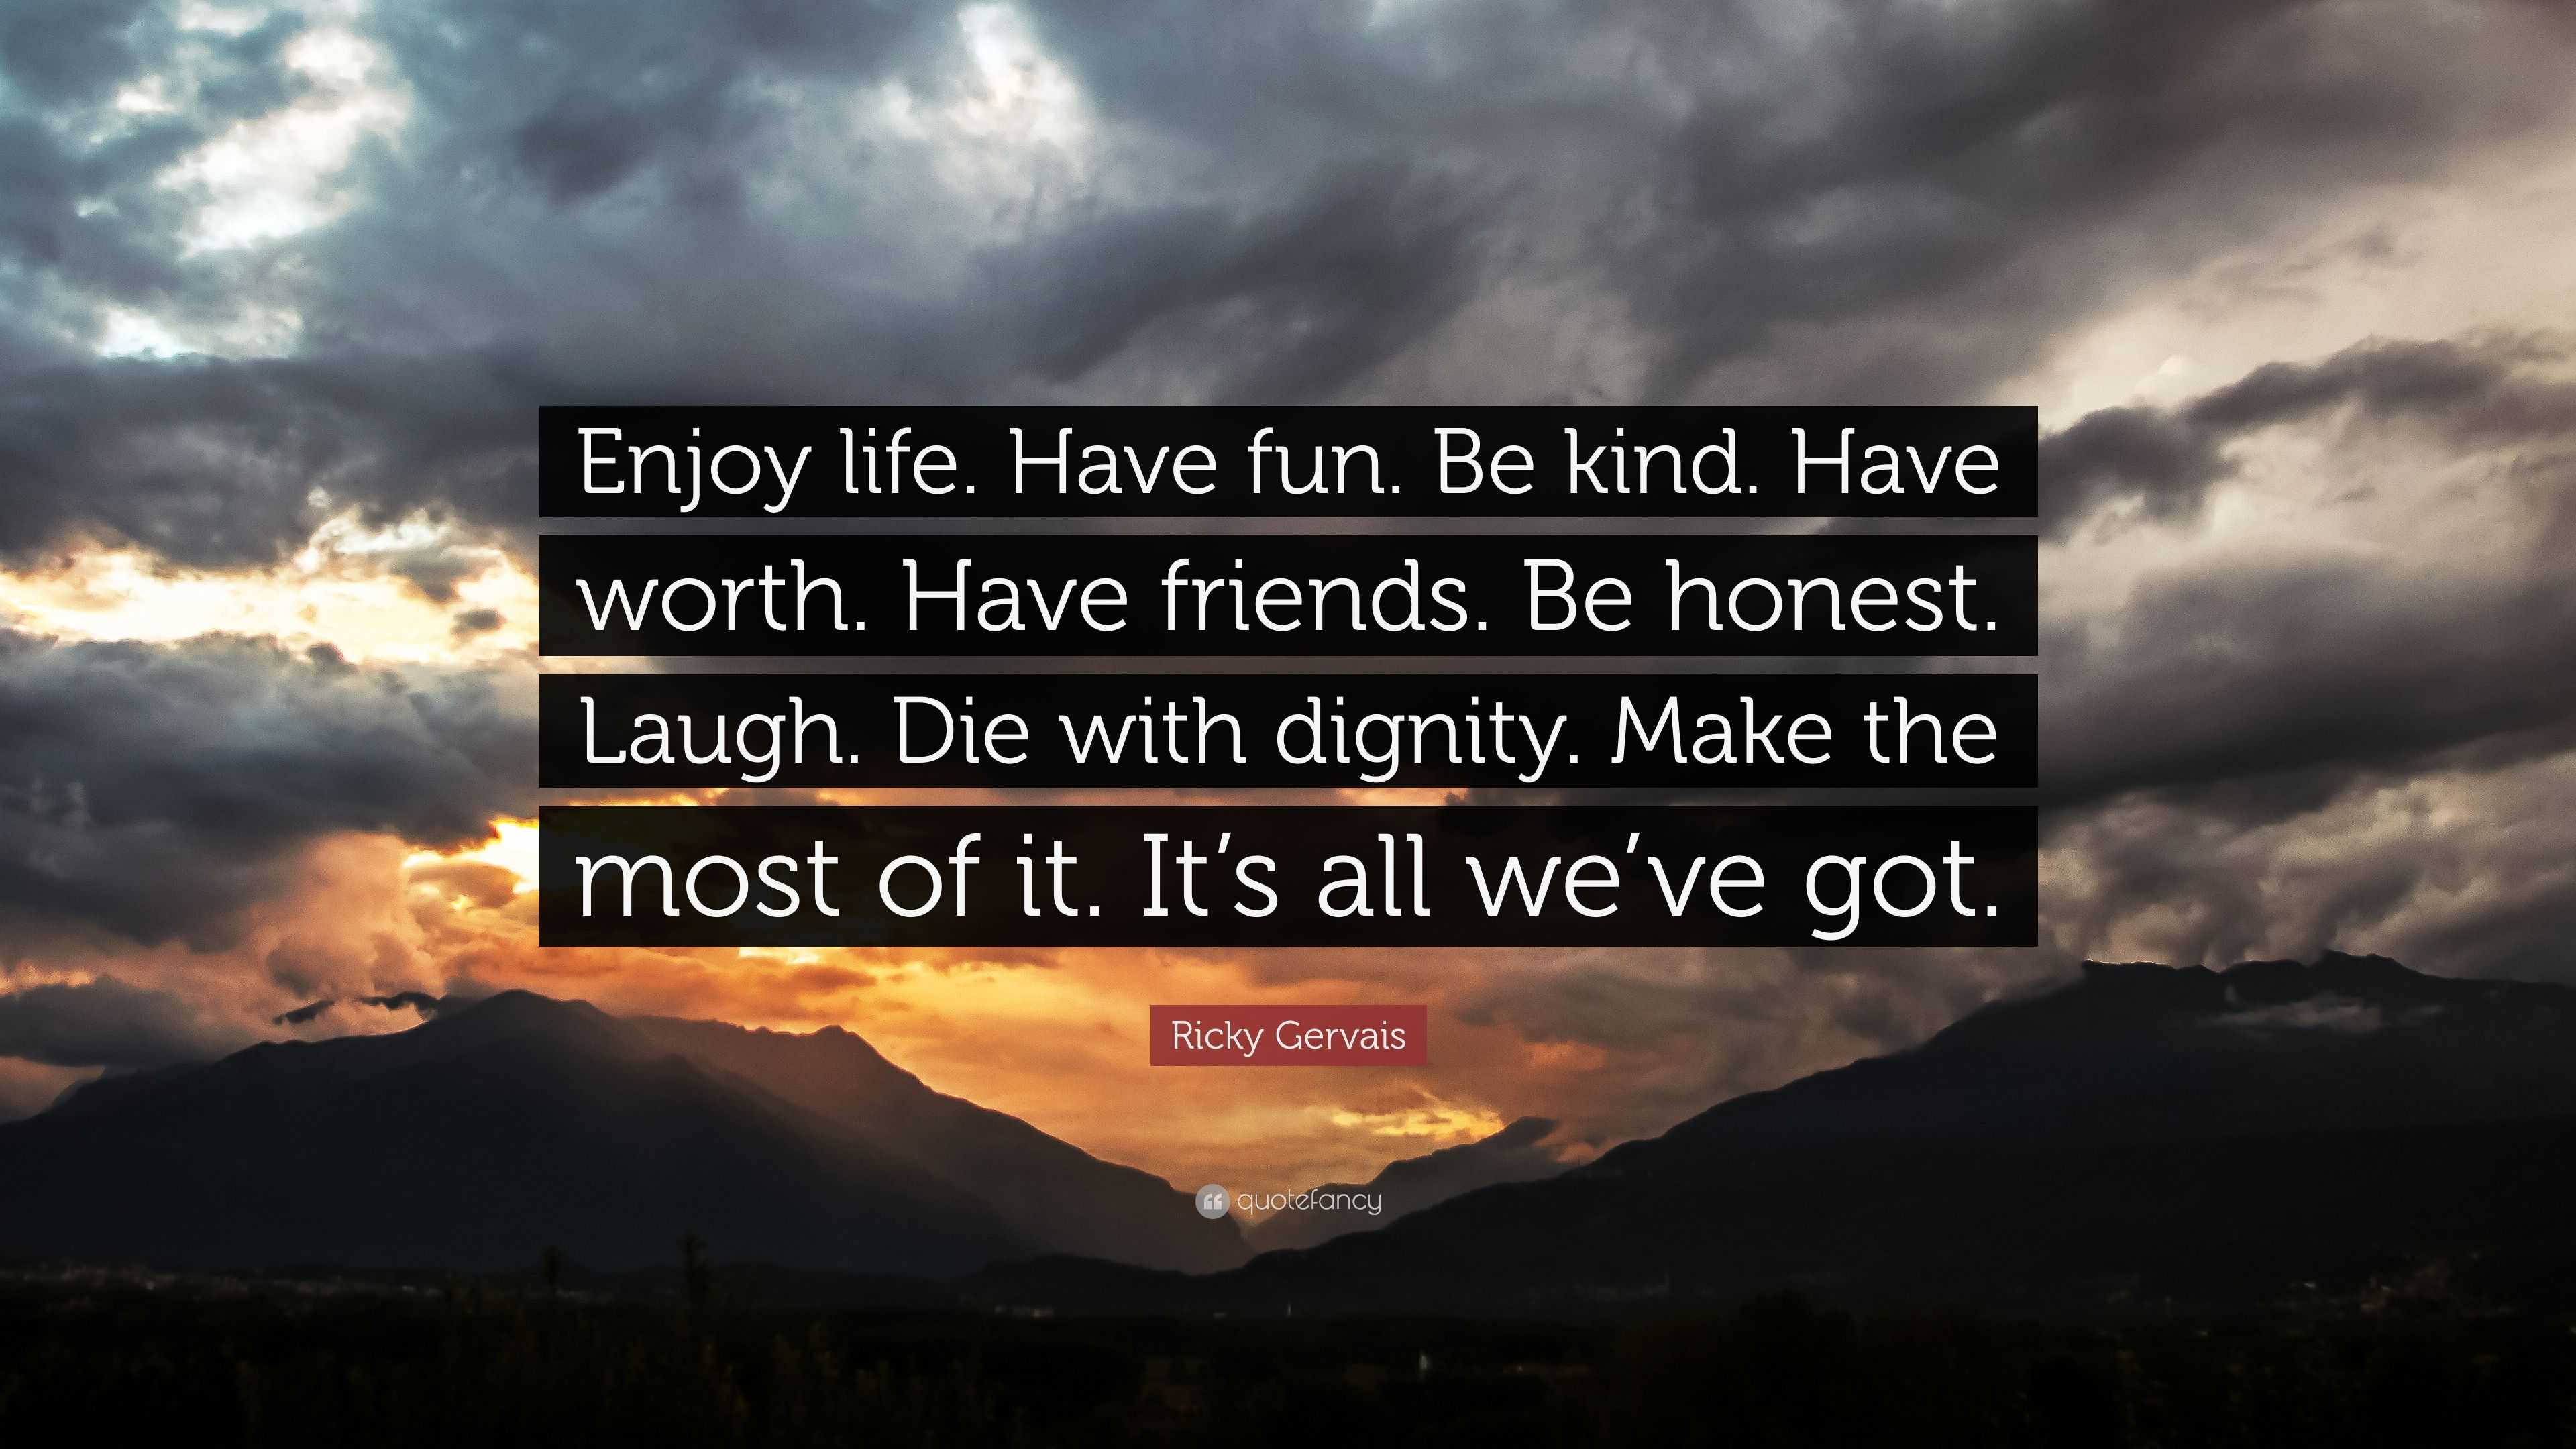 “Enjoy life. Have fun. Be kind. Have worth. Have friends. Be honest. Laugh. Die with dignity. Make the most of it. It’s all we’ve got.”